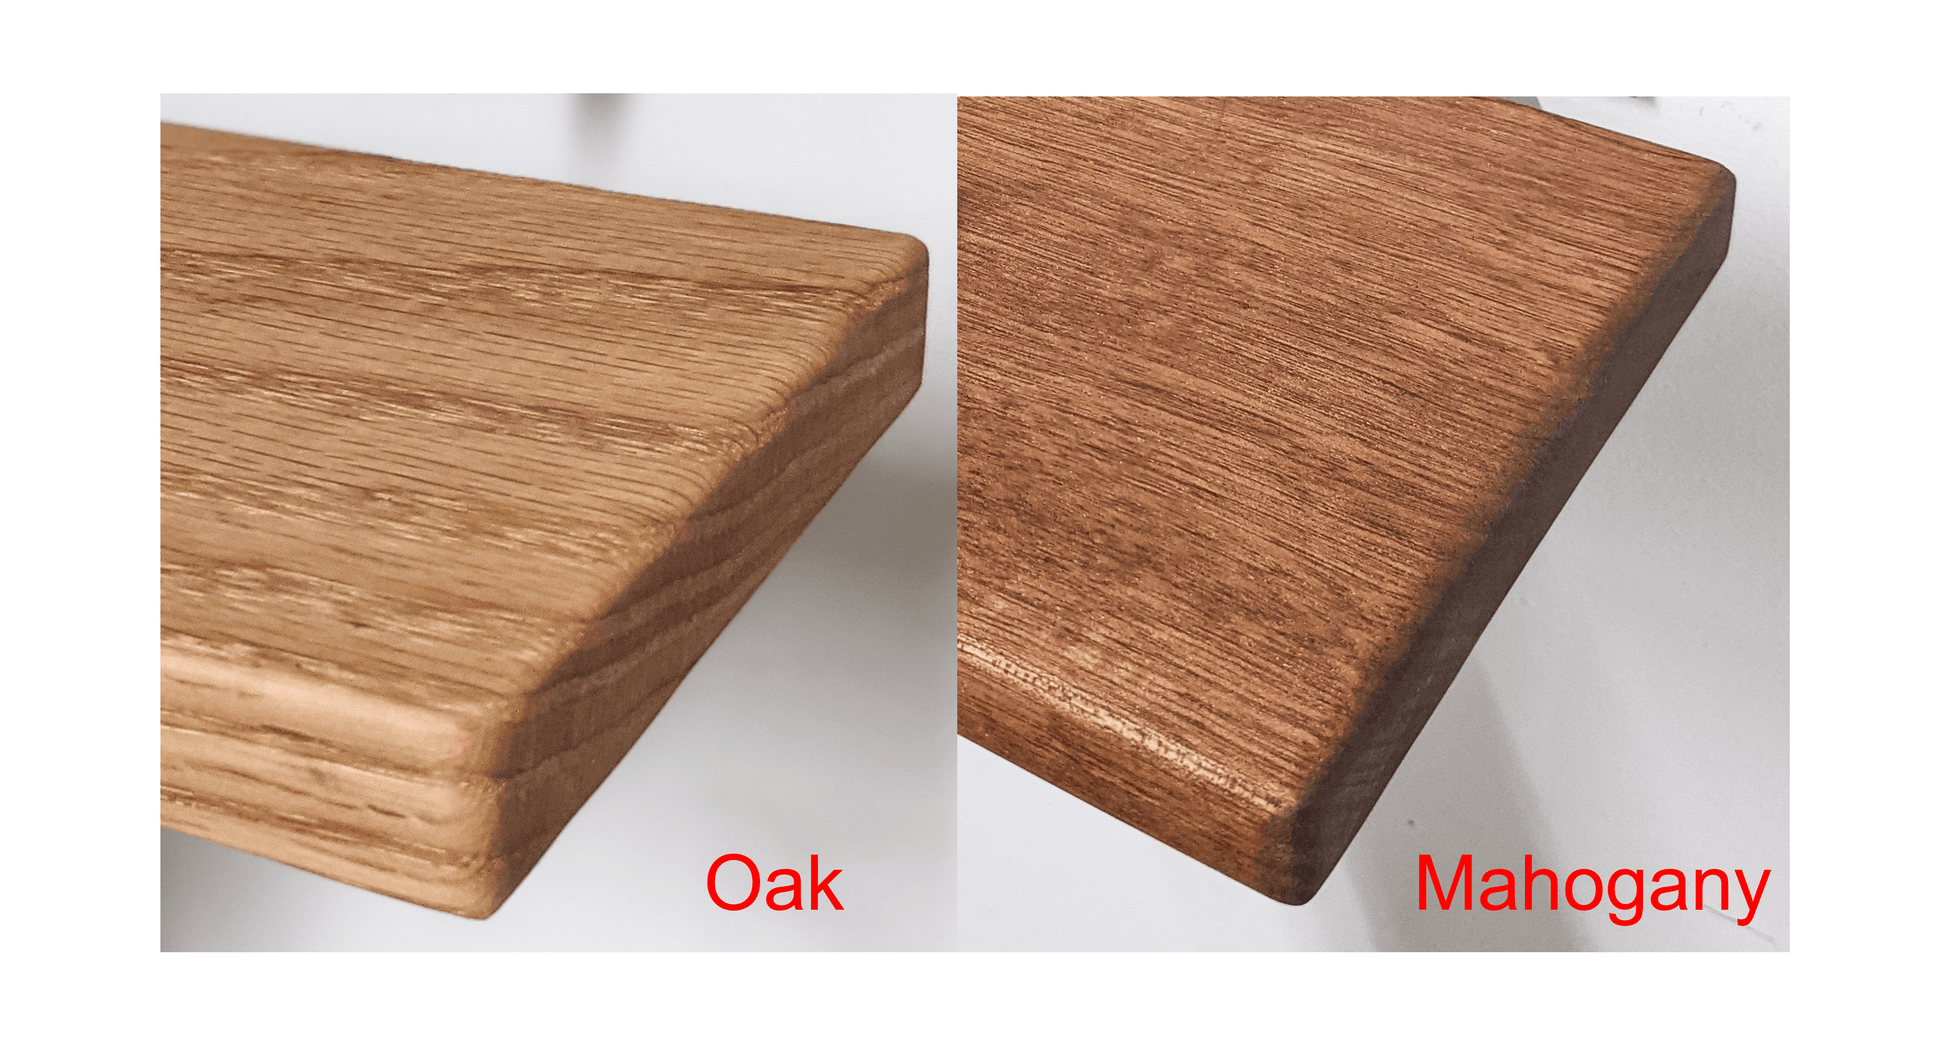 To the left, an image of the corner of an oak wood floating shelf, the edges are softly rounded and the wood displays a fine light grain. In the bottom right hand corner of the picture, in red letters, it reads, "Oak". To the right, an image of the corner of a mahogany floating shelf. The grain is fine and reddish-brown, the edges are soft. In the bottom right-hand corner of the picture, in red letters, it reads, "Mahogany".